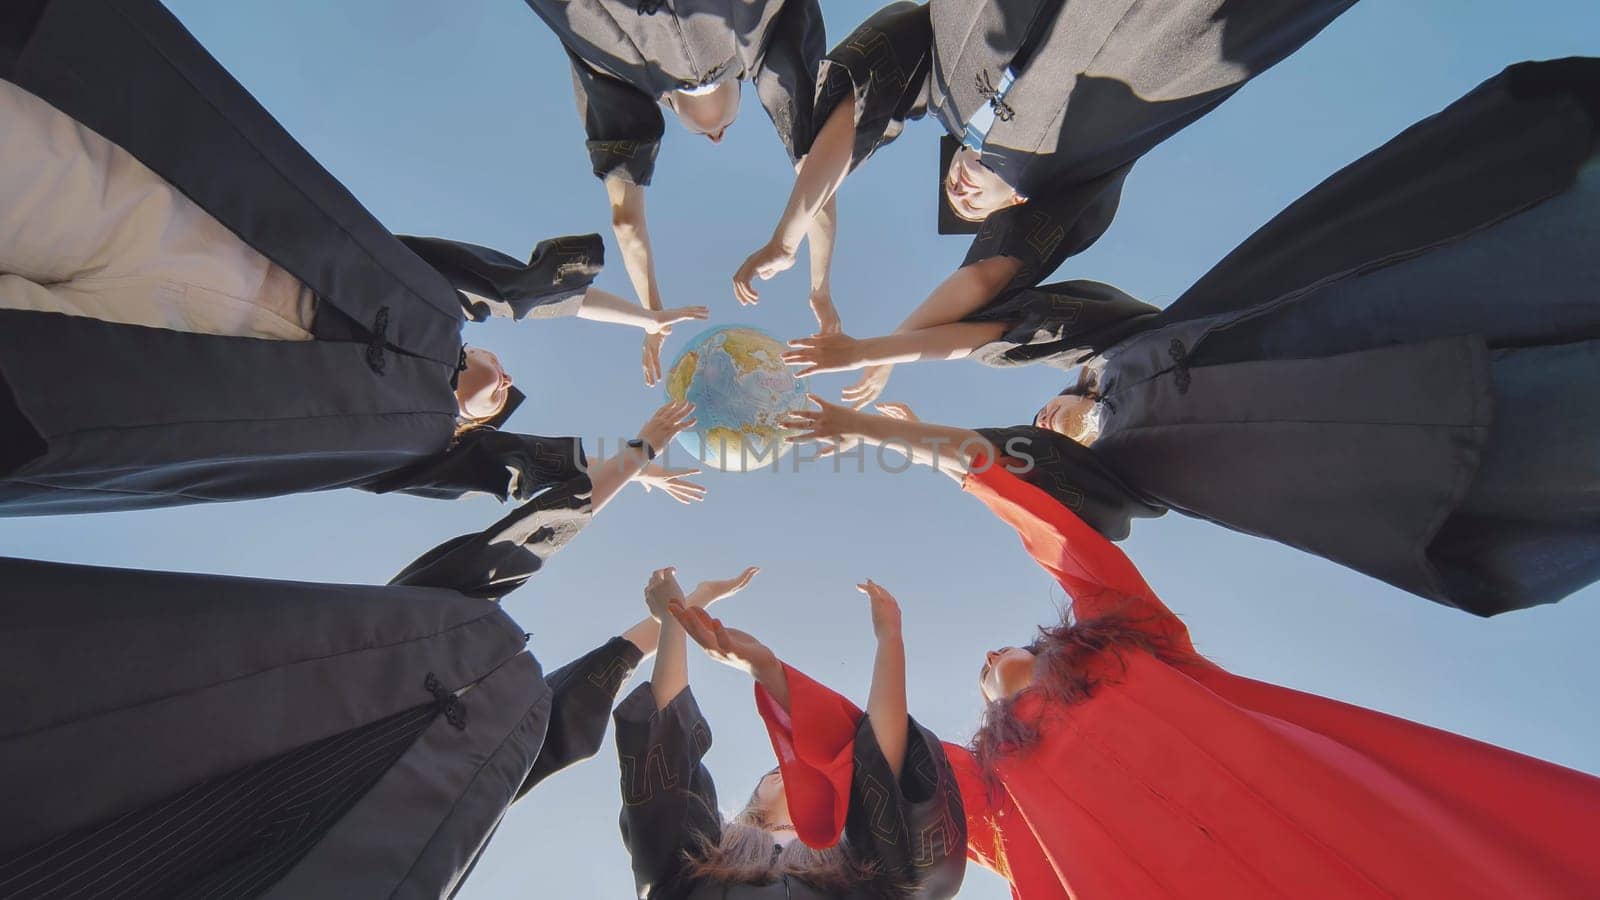 College alumni students toss a globe of the world into the sky